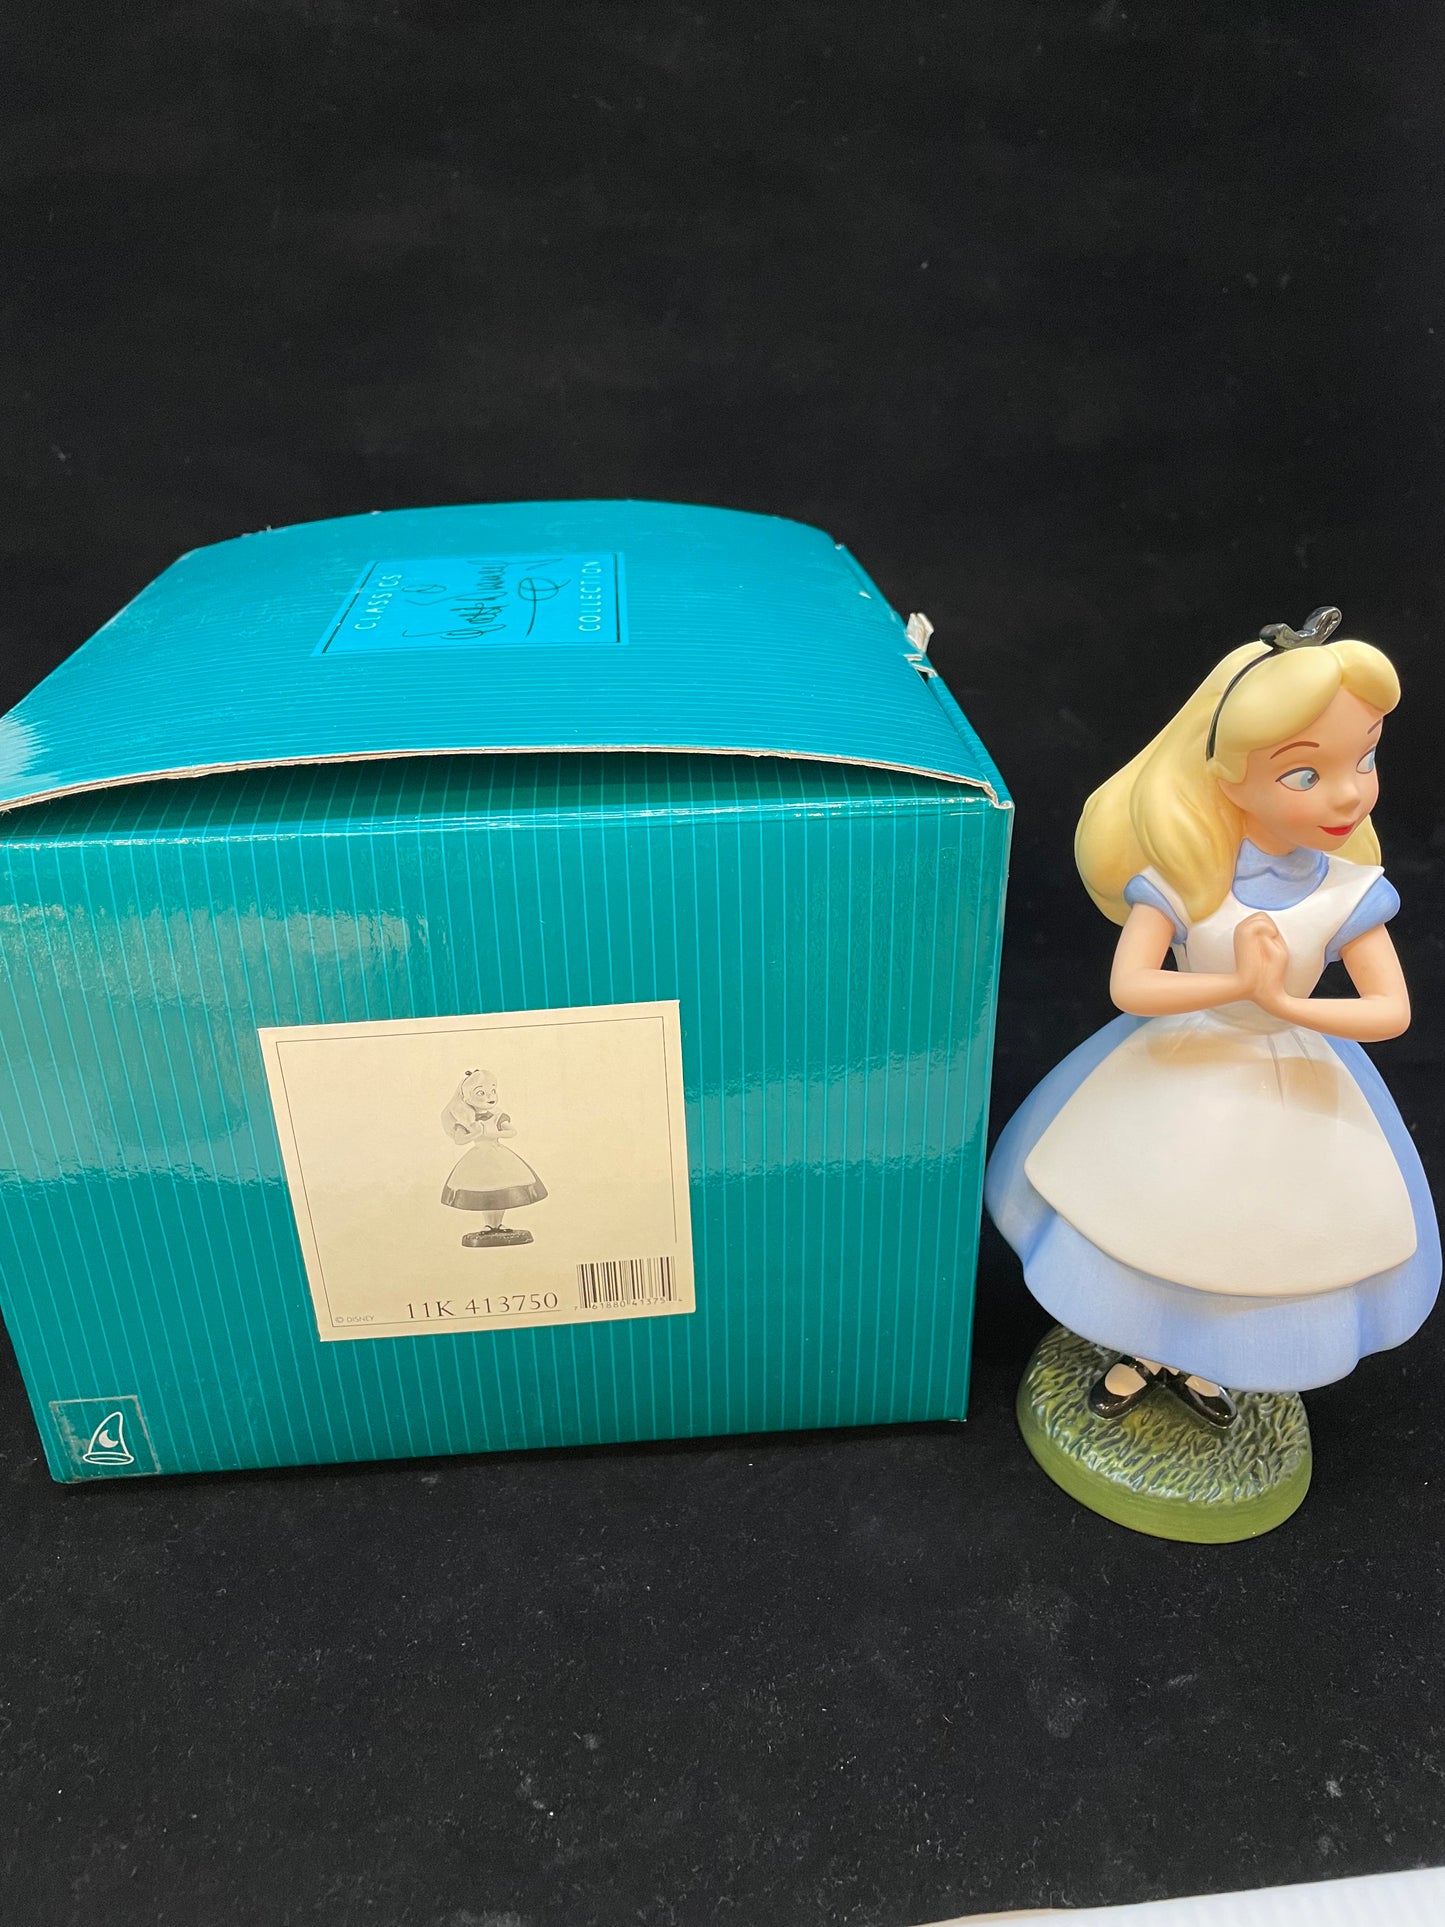 Walt Disney Classics Collection "Yes, Your Majesty" Alice Figurine